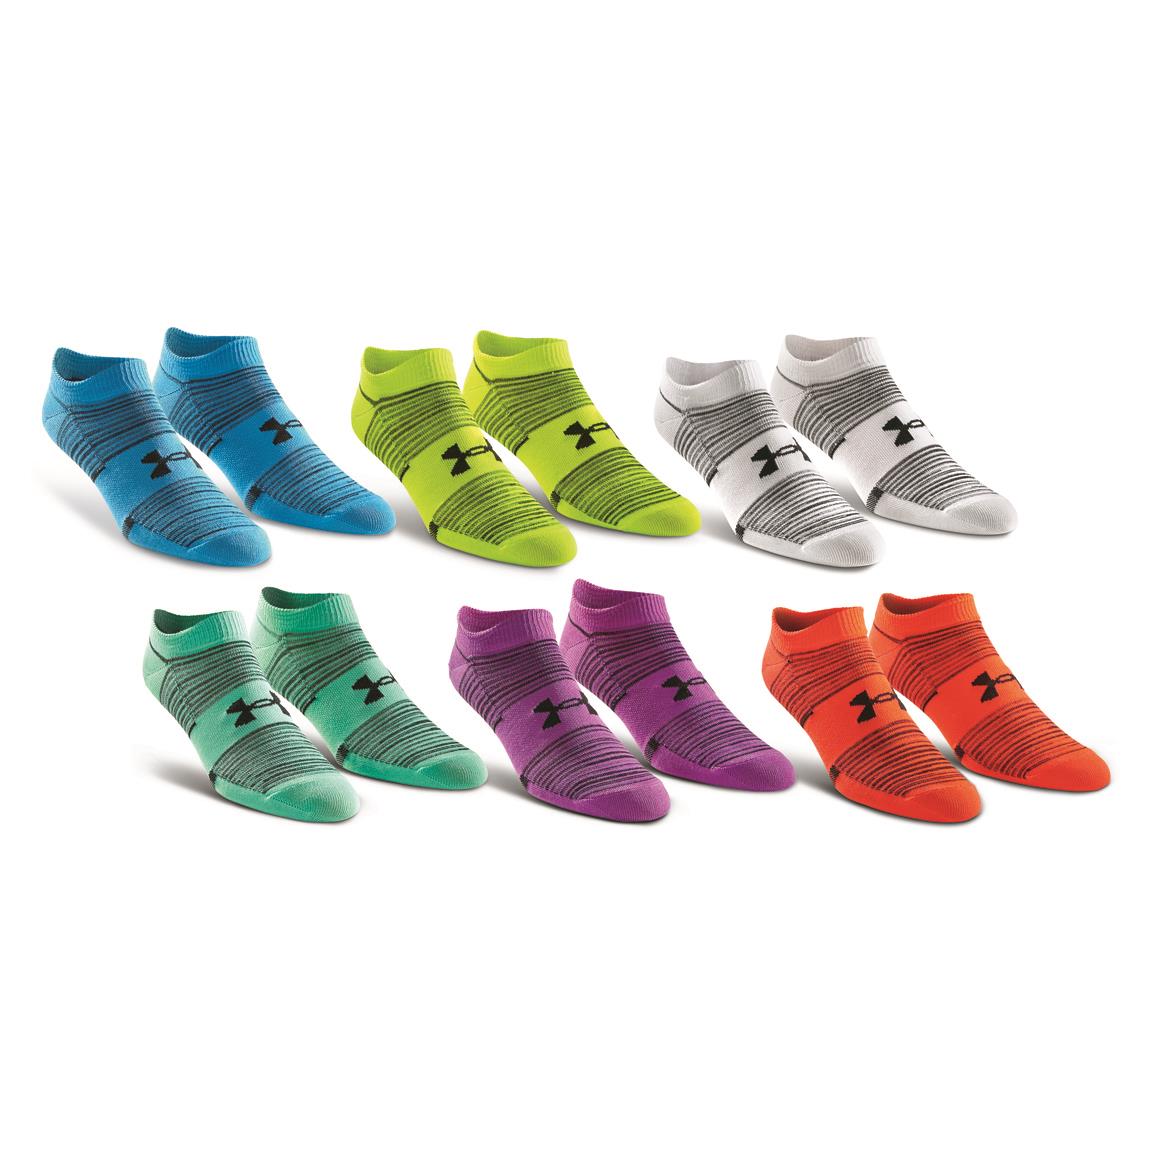 Under Armour Women's Essentials No-show 2.0 Socks, 6 Pairs - 707609, Socks  at Sportsman's Guide